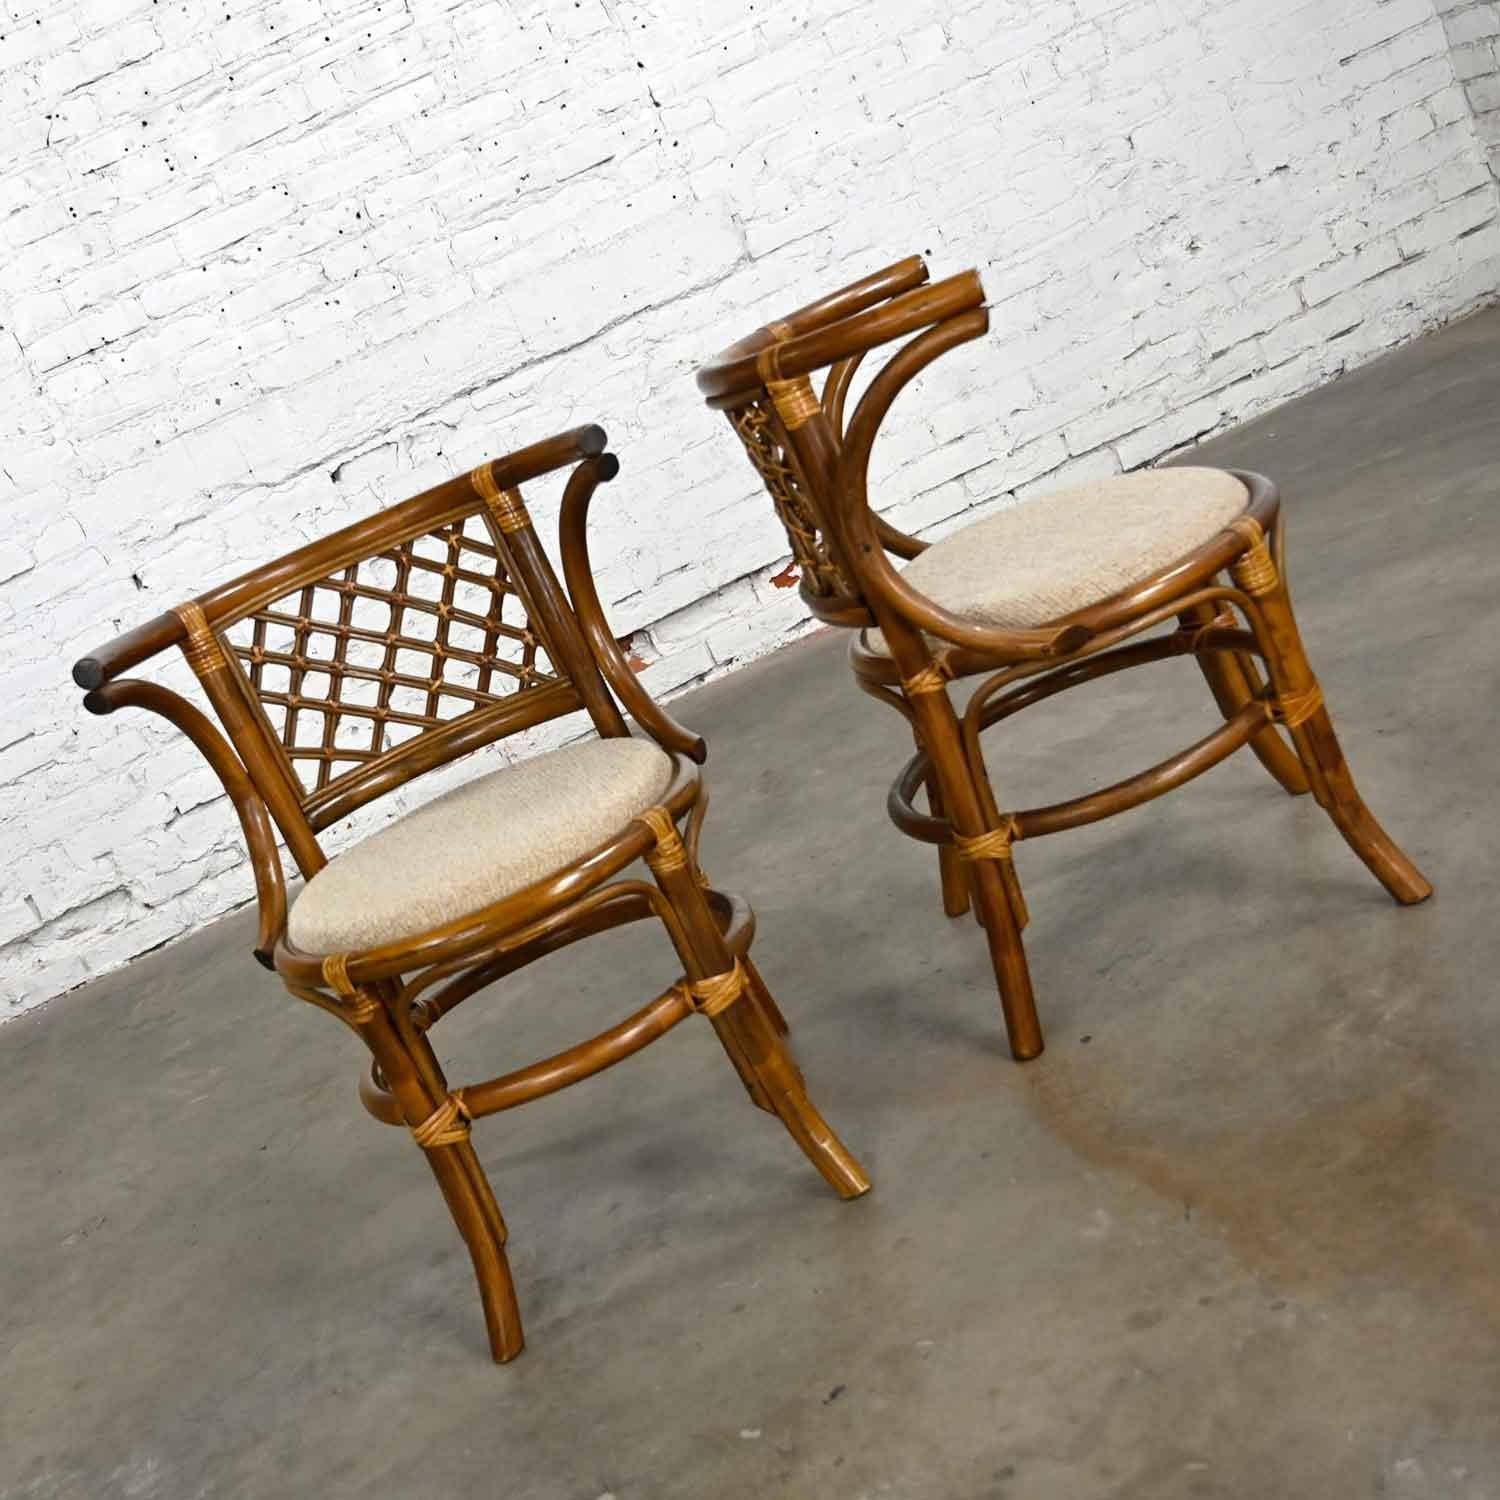 Handsome pair of vintage rattan & cane side chairs with oatmeal or off-white nubby tweed fabric seat cushions and woven diamond pattern yoke seat backs. Beautiful condition, keeping in mind that these are vintage and not new so will have signs of